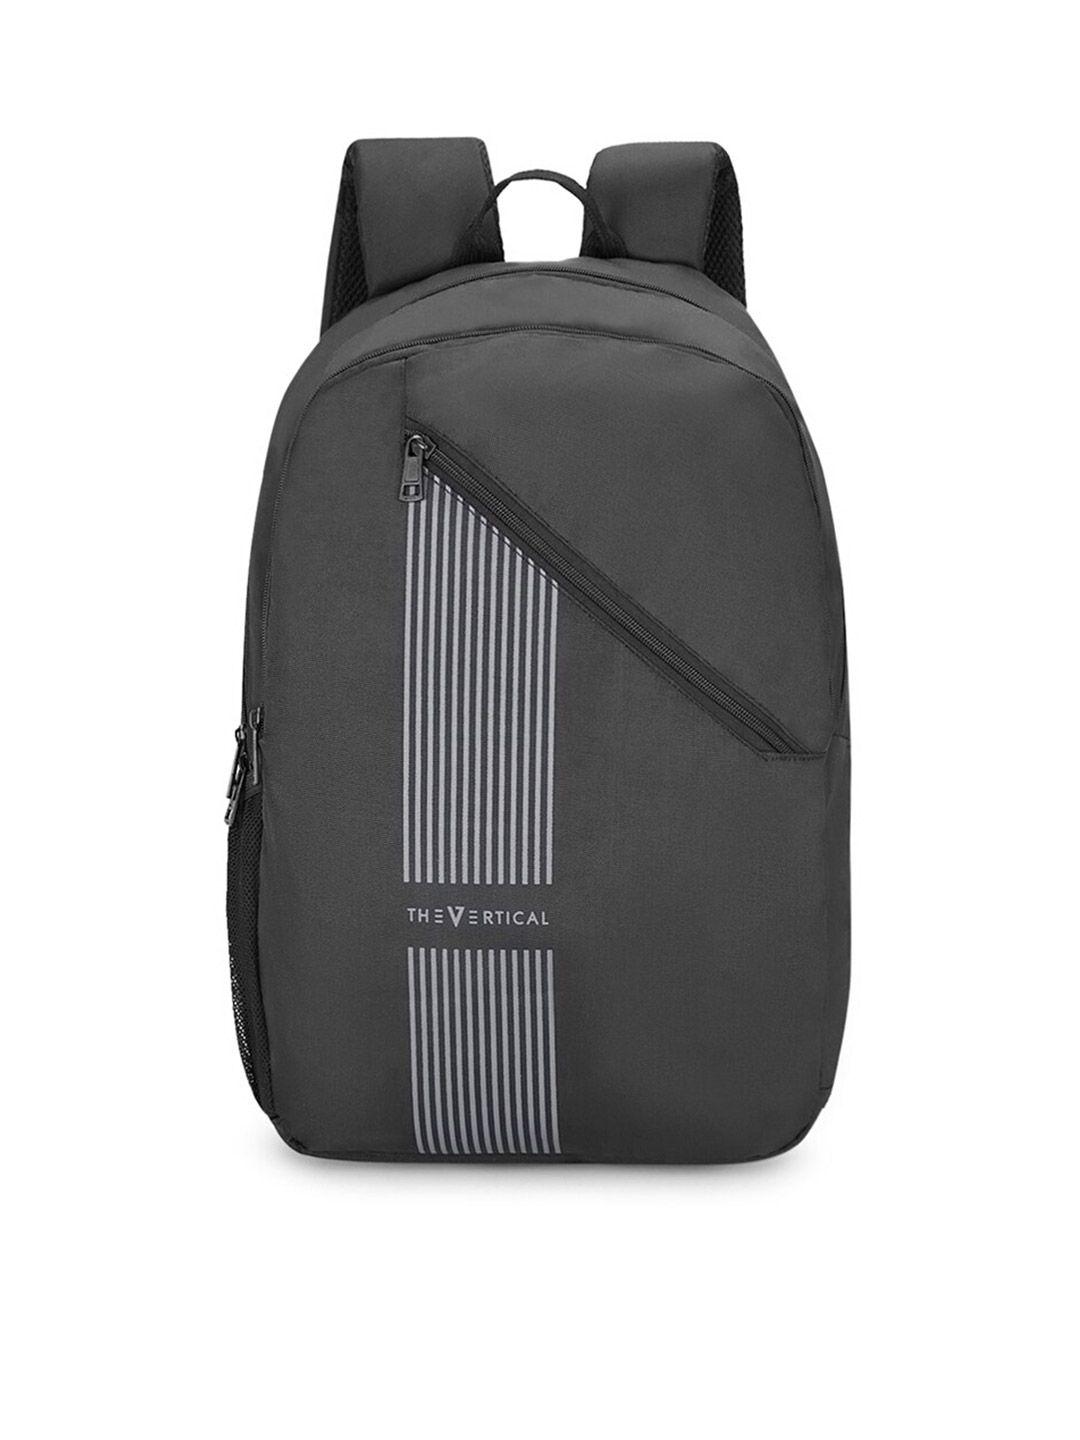 THe VerTicaL Unisex Striped Backpack